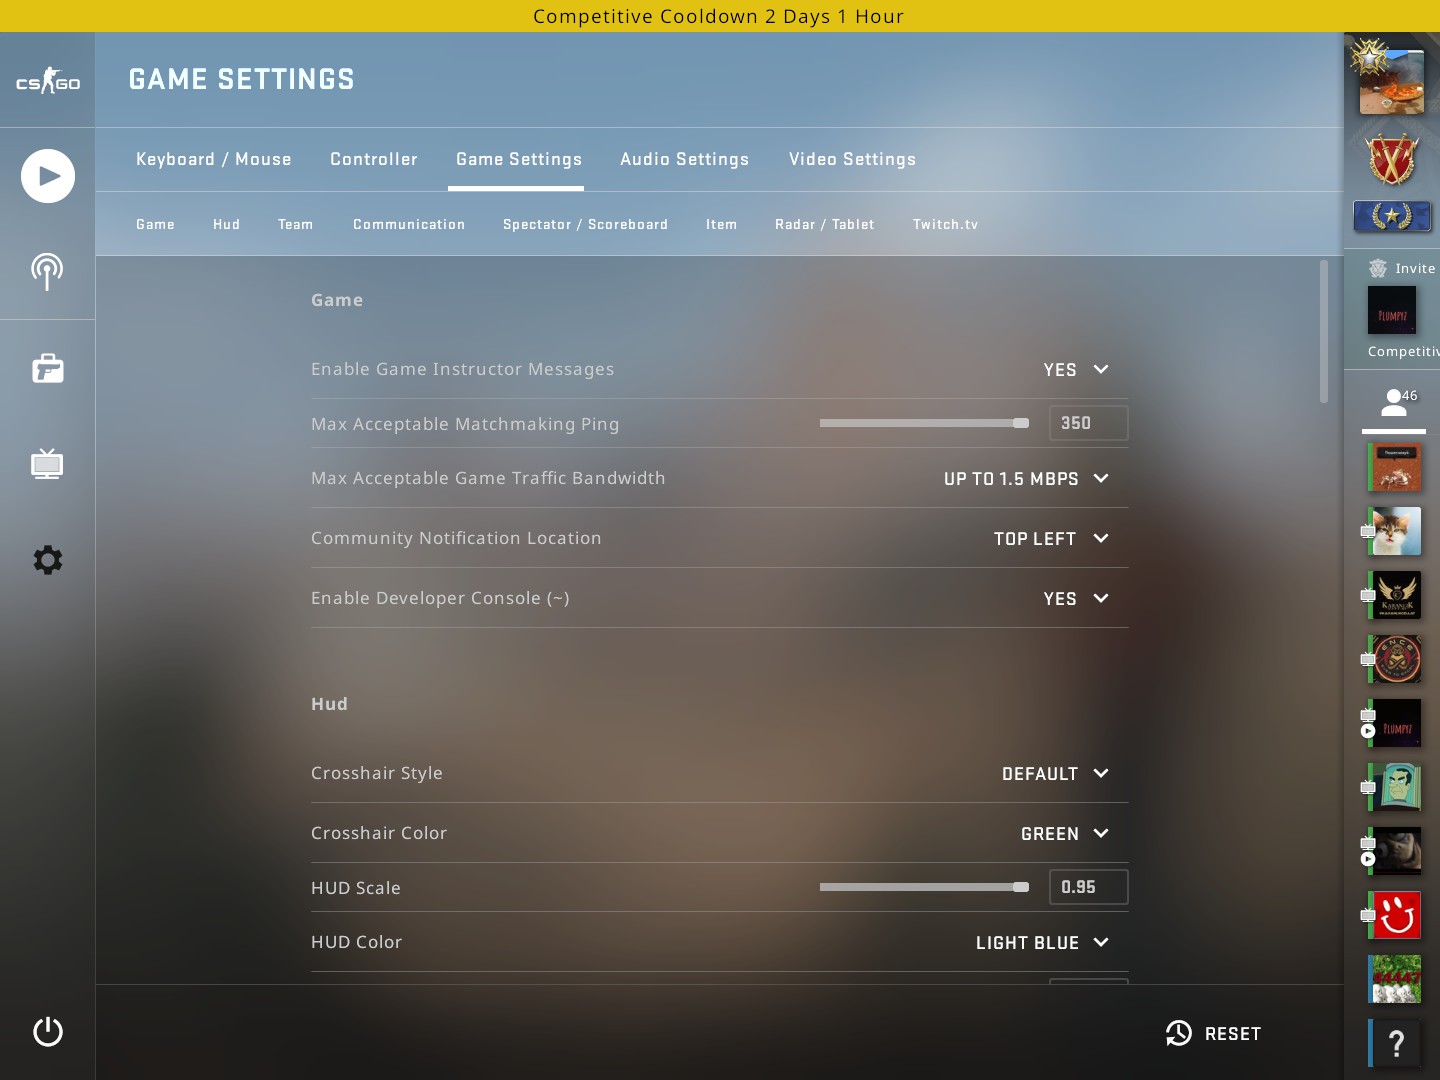 You are not connected to matchmaking servers in Belém